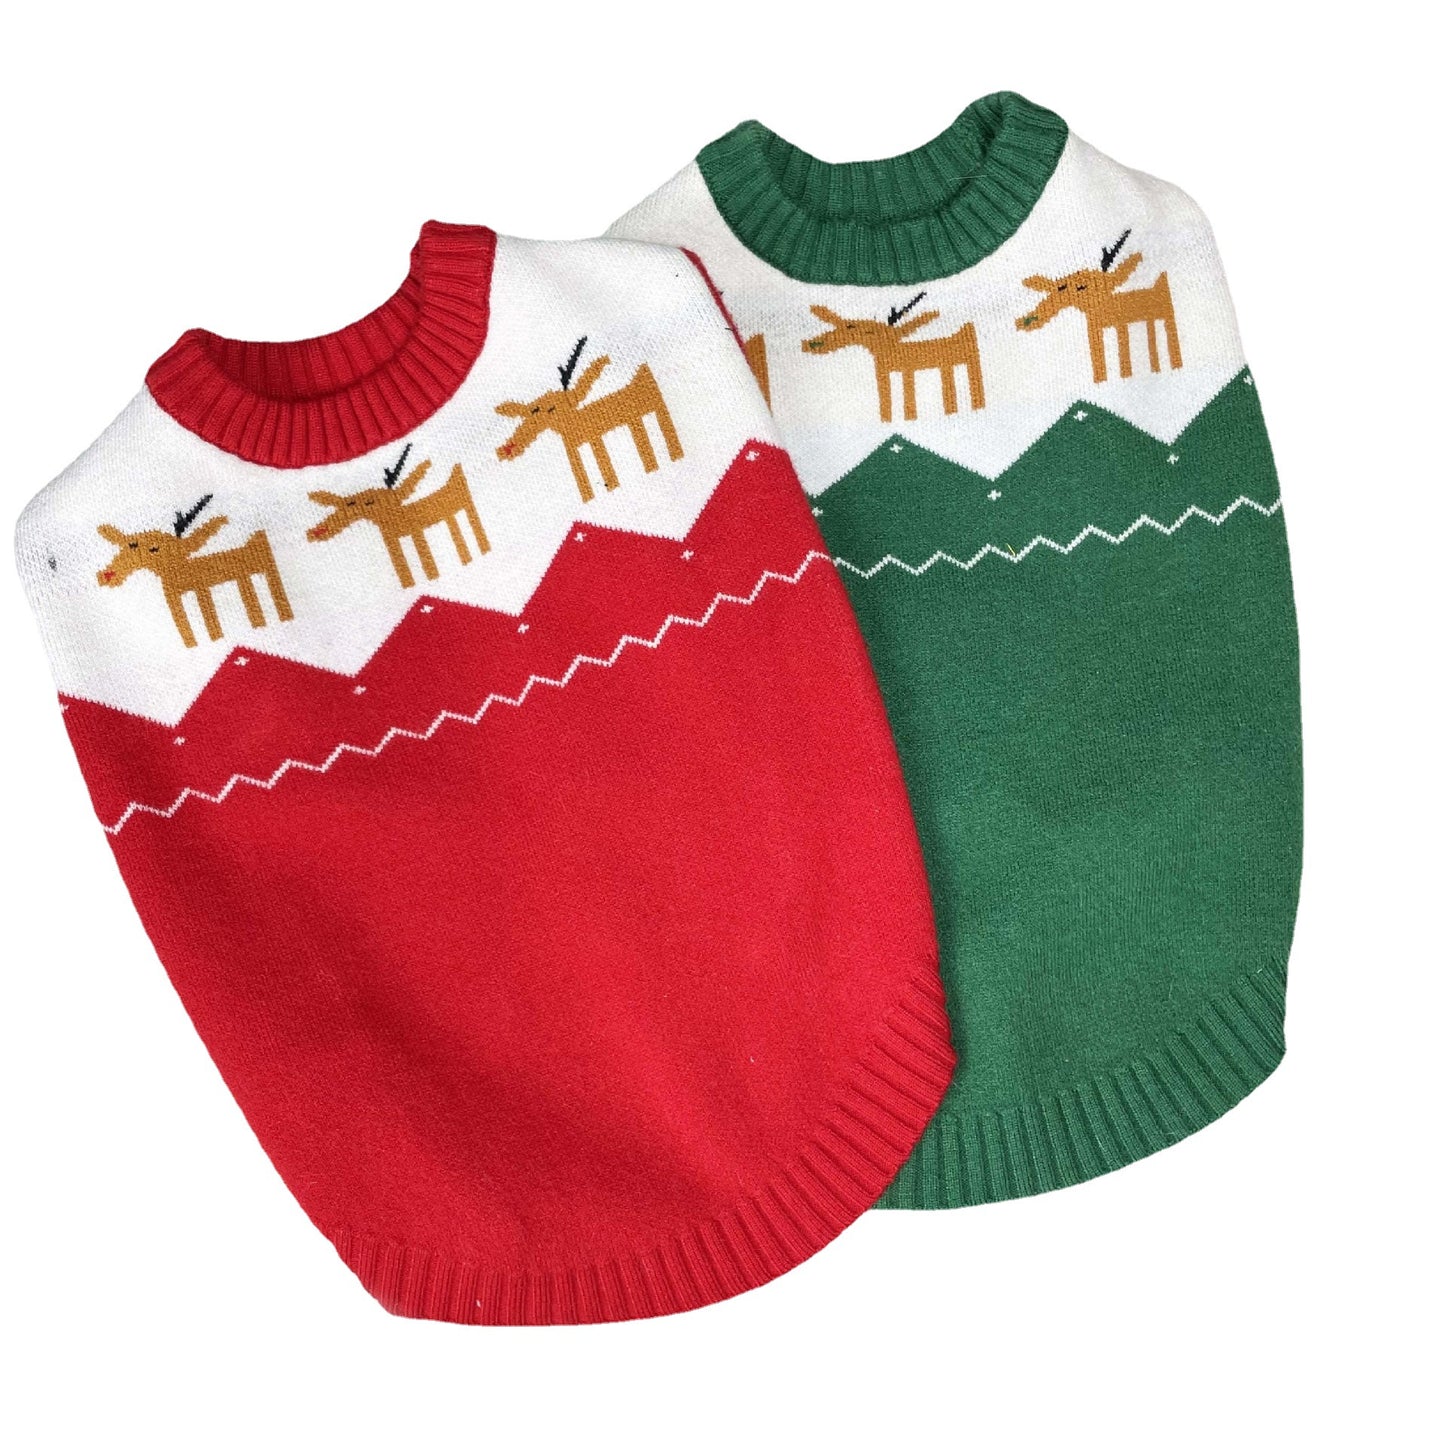 Autumn and winter knitted wool sweater with Christmas reindeer. Luxury chic sweater for dogs, cats and pets